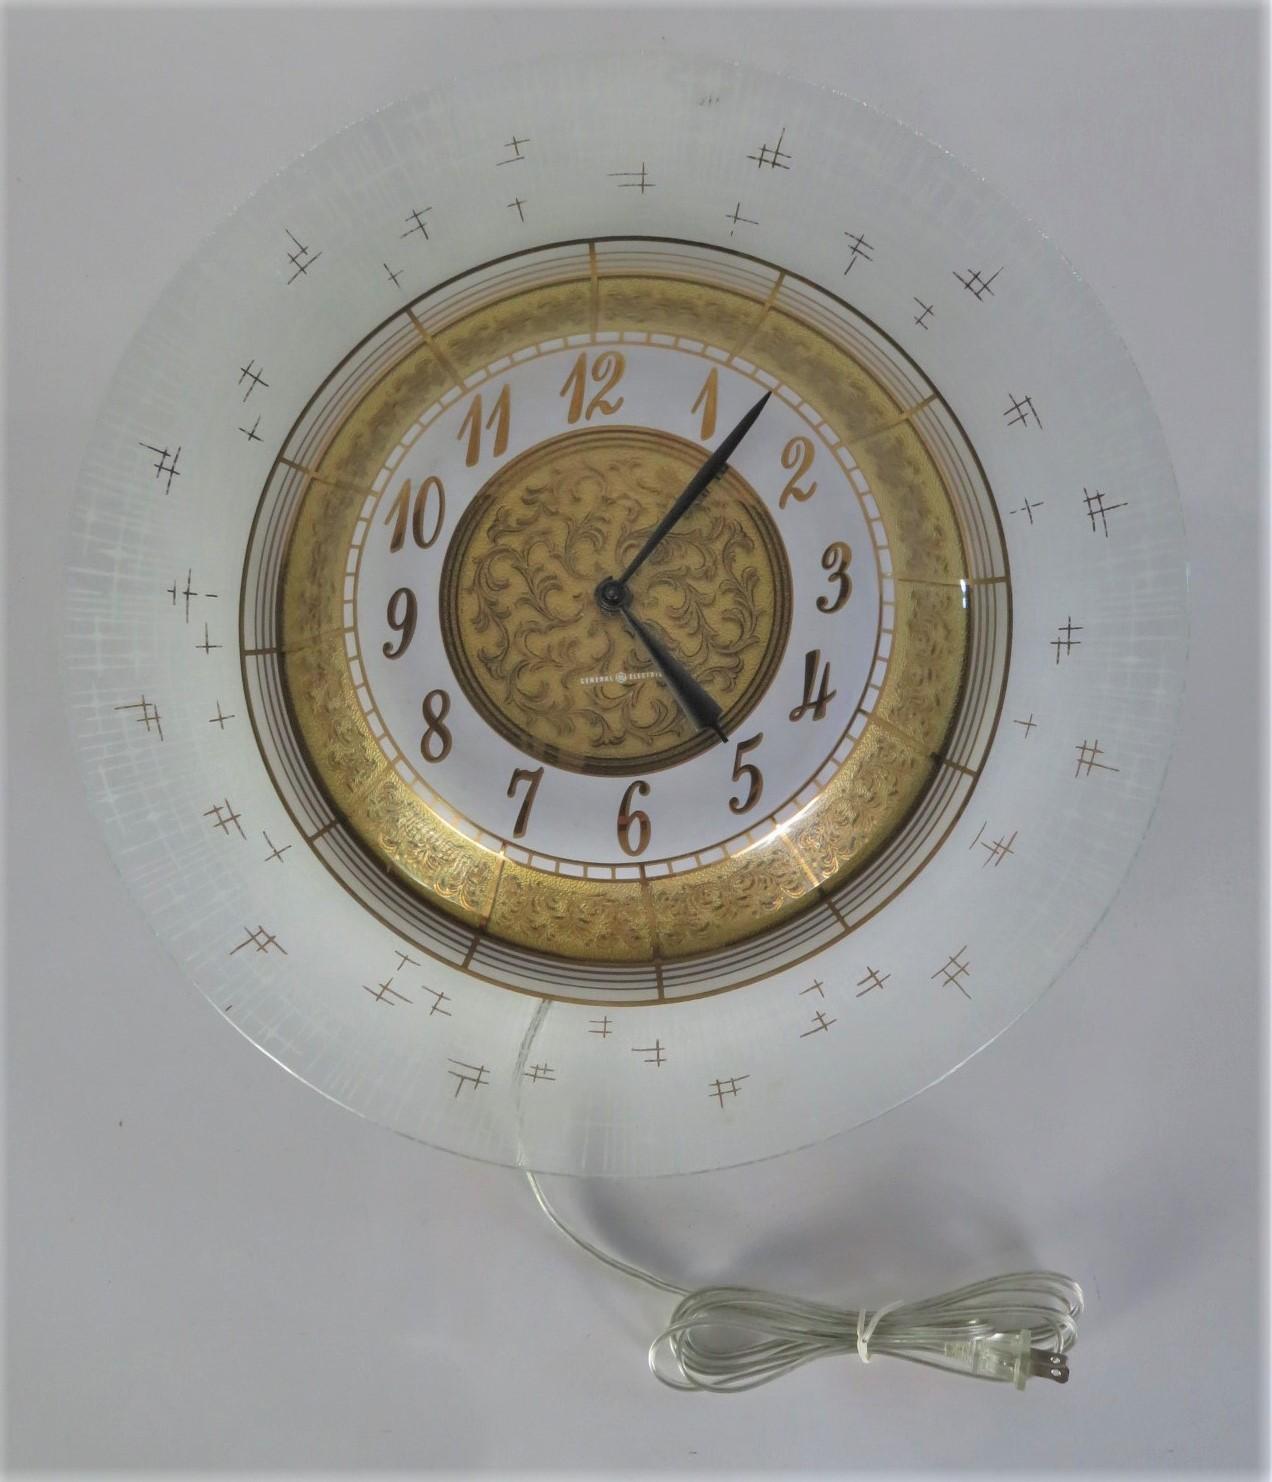 Modern and sophisticated, this Hollywood Regency and Higgins era glass bodied wall clock by General Electric has many decorative hallmarks starting with an undulating shape with gilt C scrolls to the inner areas on glass and a frosted stars streak